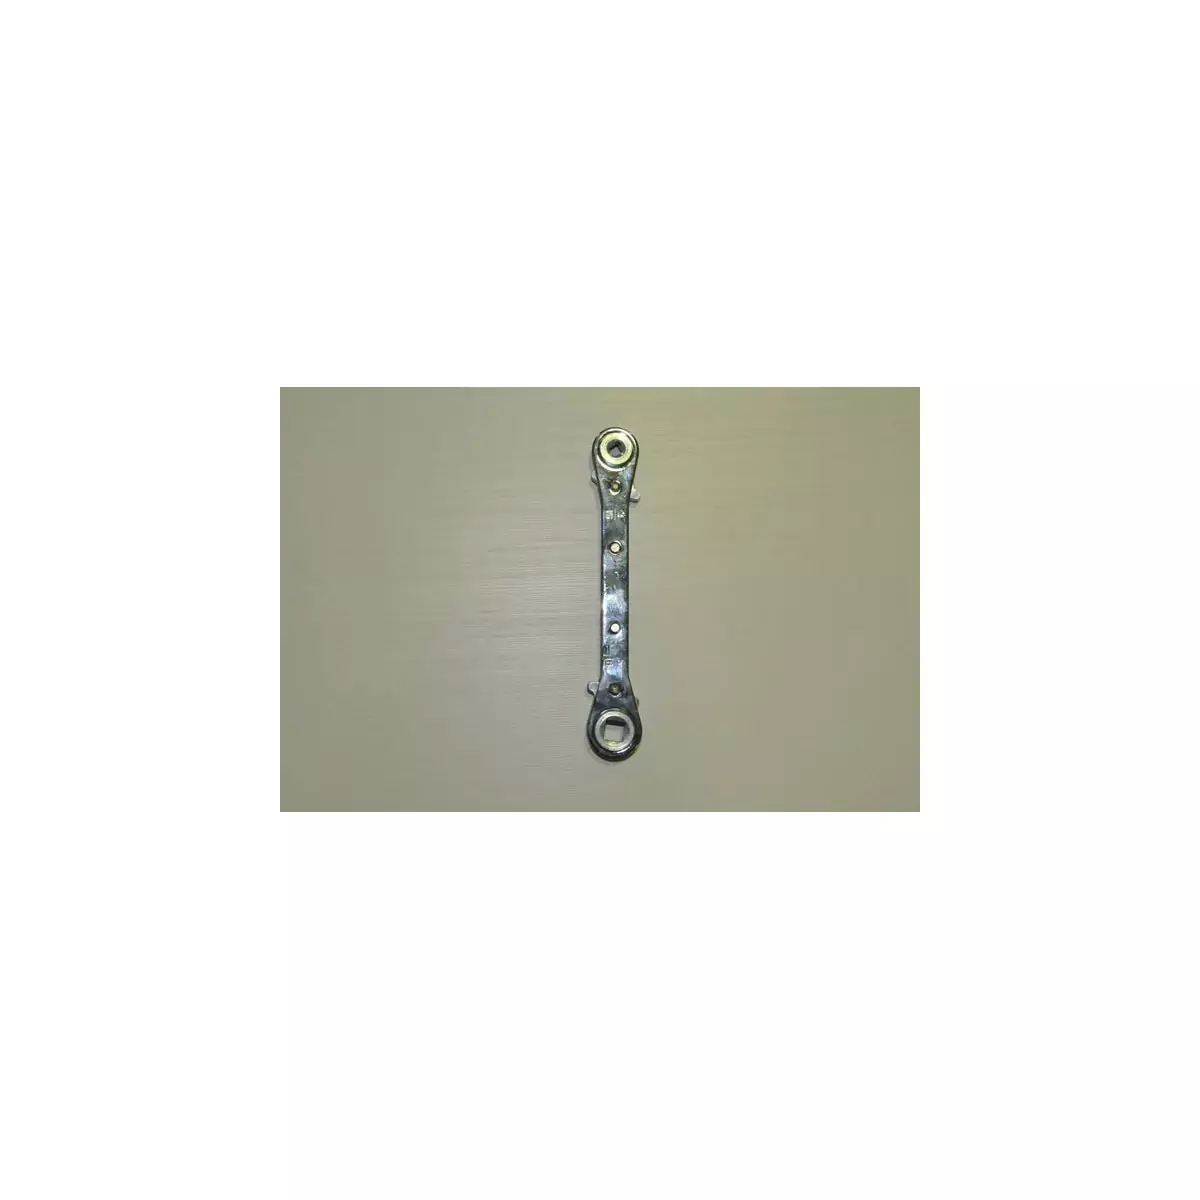 Product sheet Ratchet wrench 1 / 4-3 / 8-3 / 16-5 / 16 '